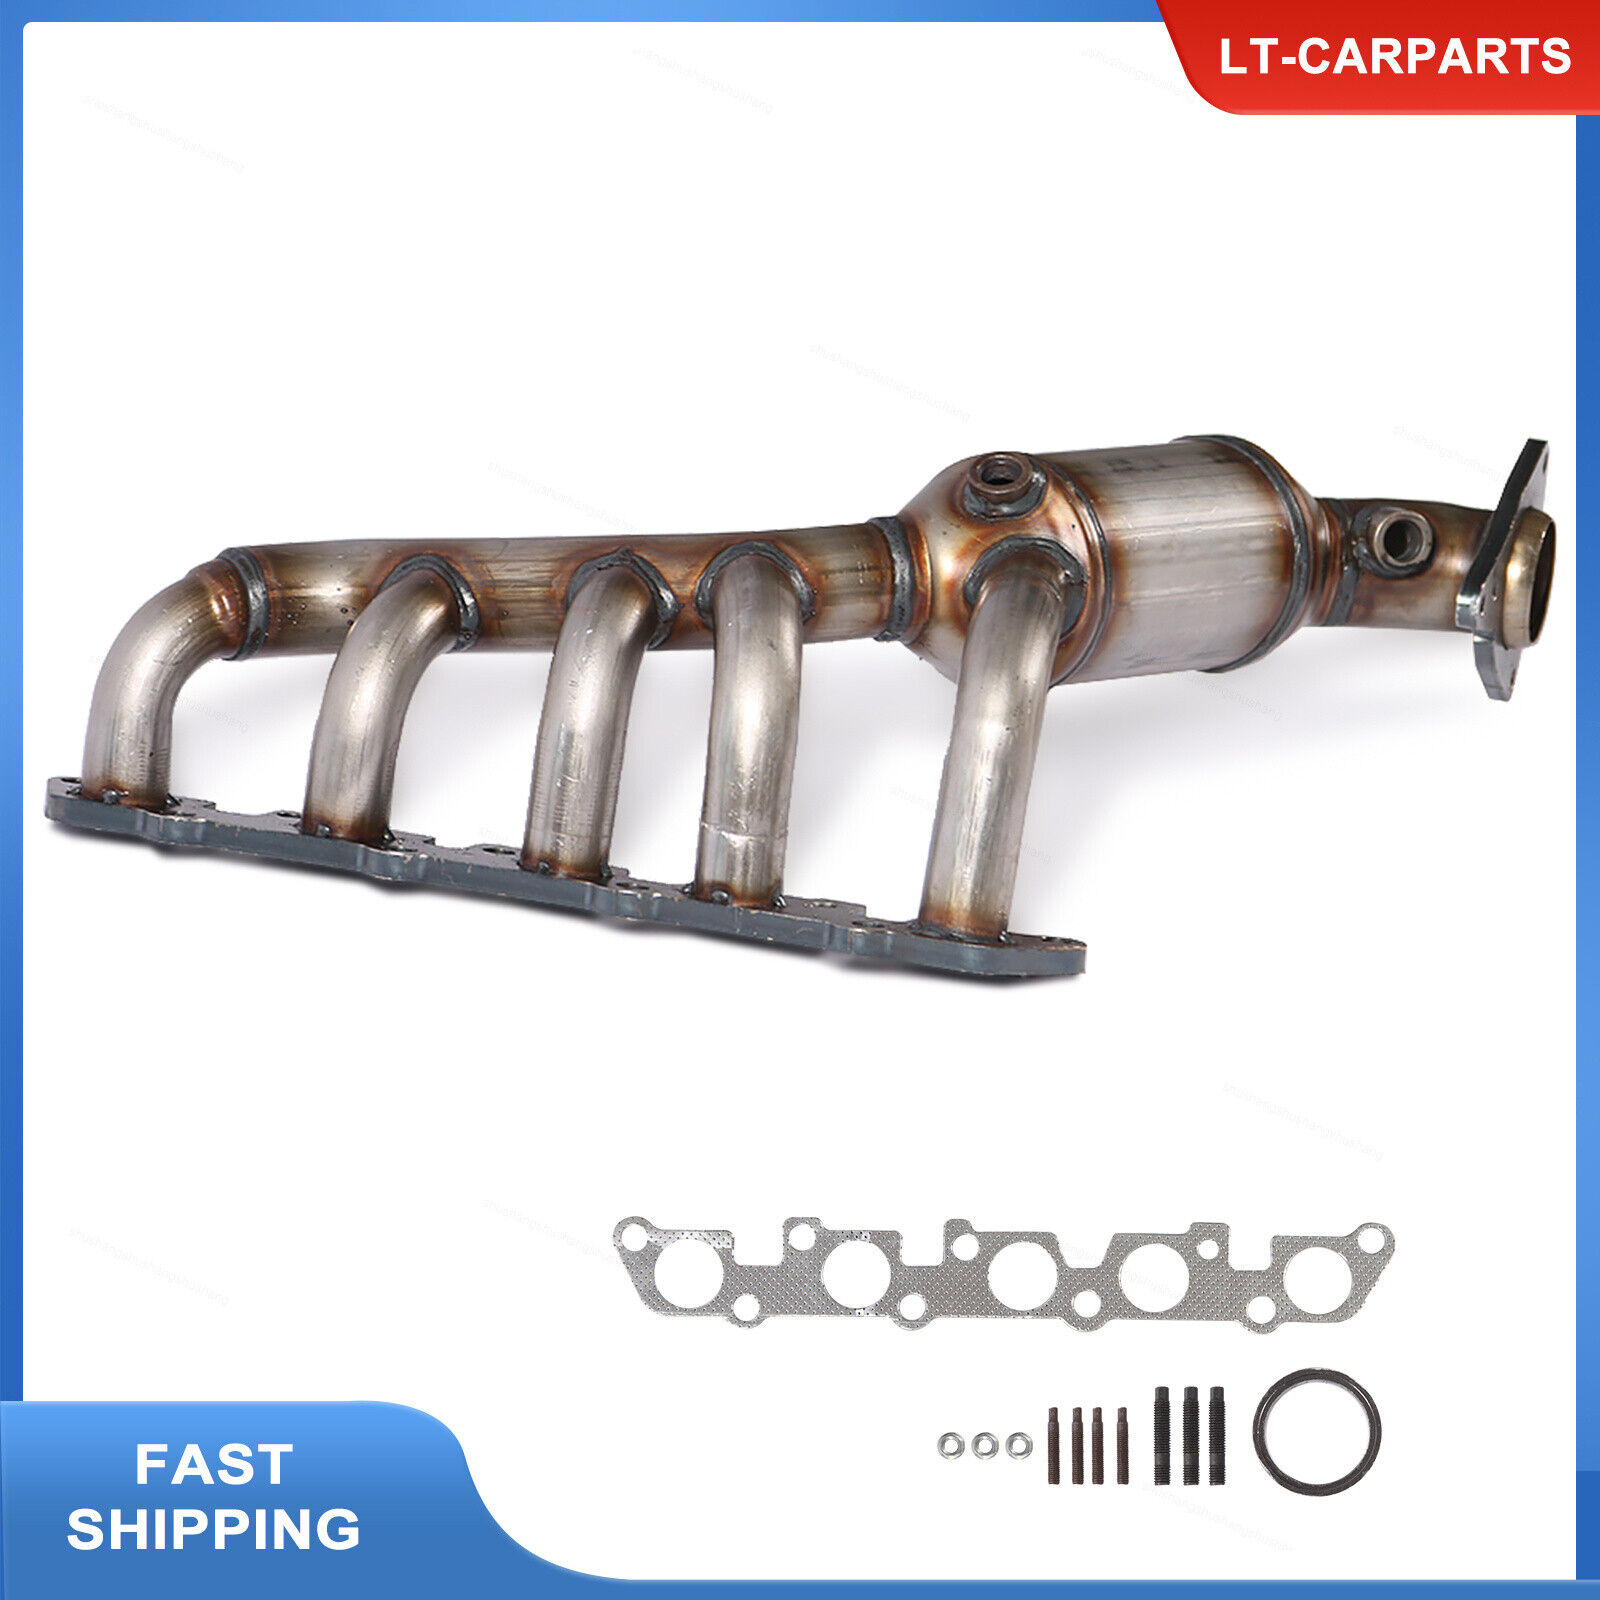 Catalytic Converter Exhaust Manifold for 2007-2012 Chevy Colorado 3.7L EPA